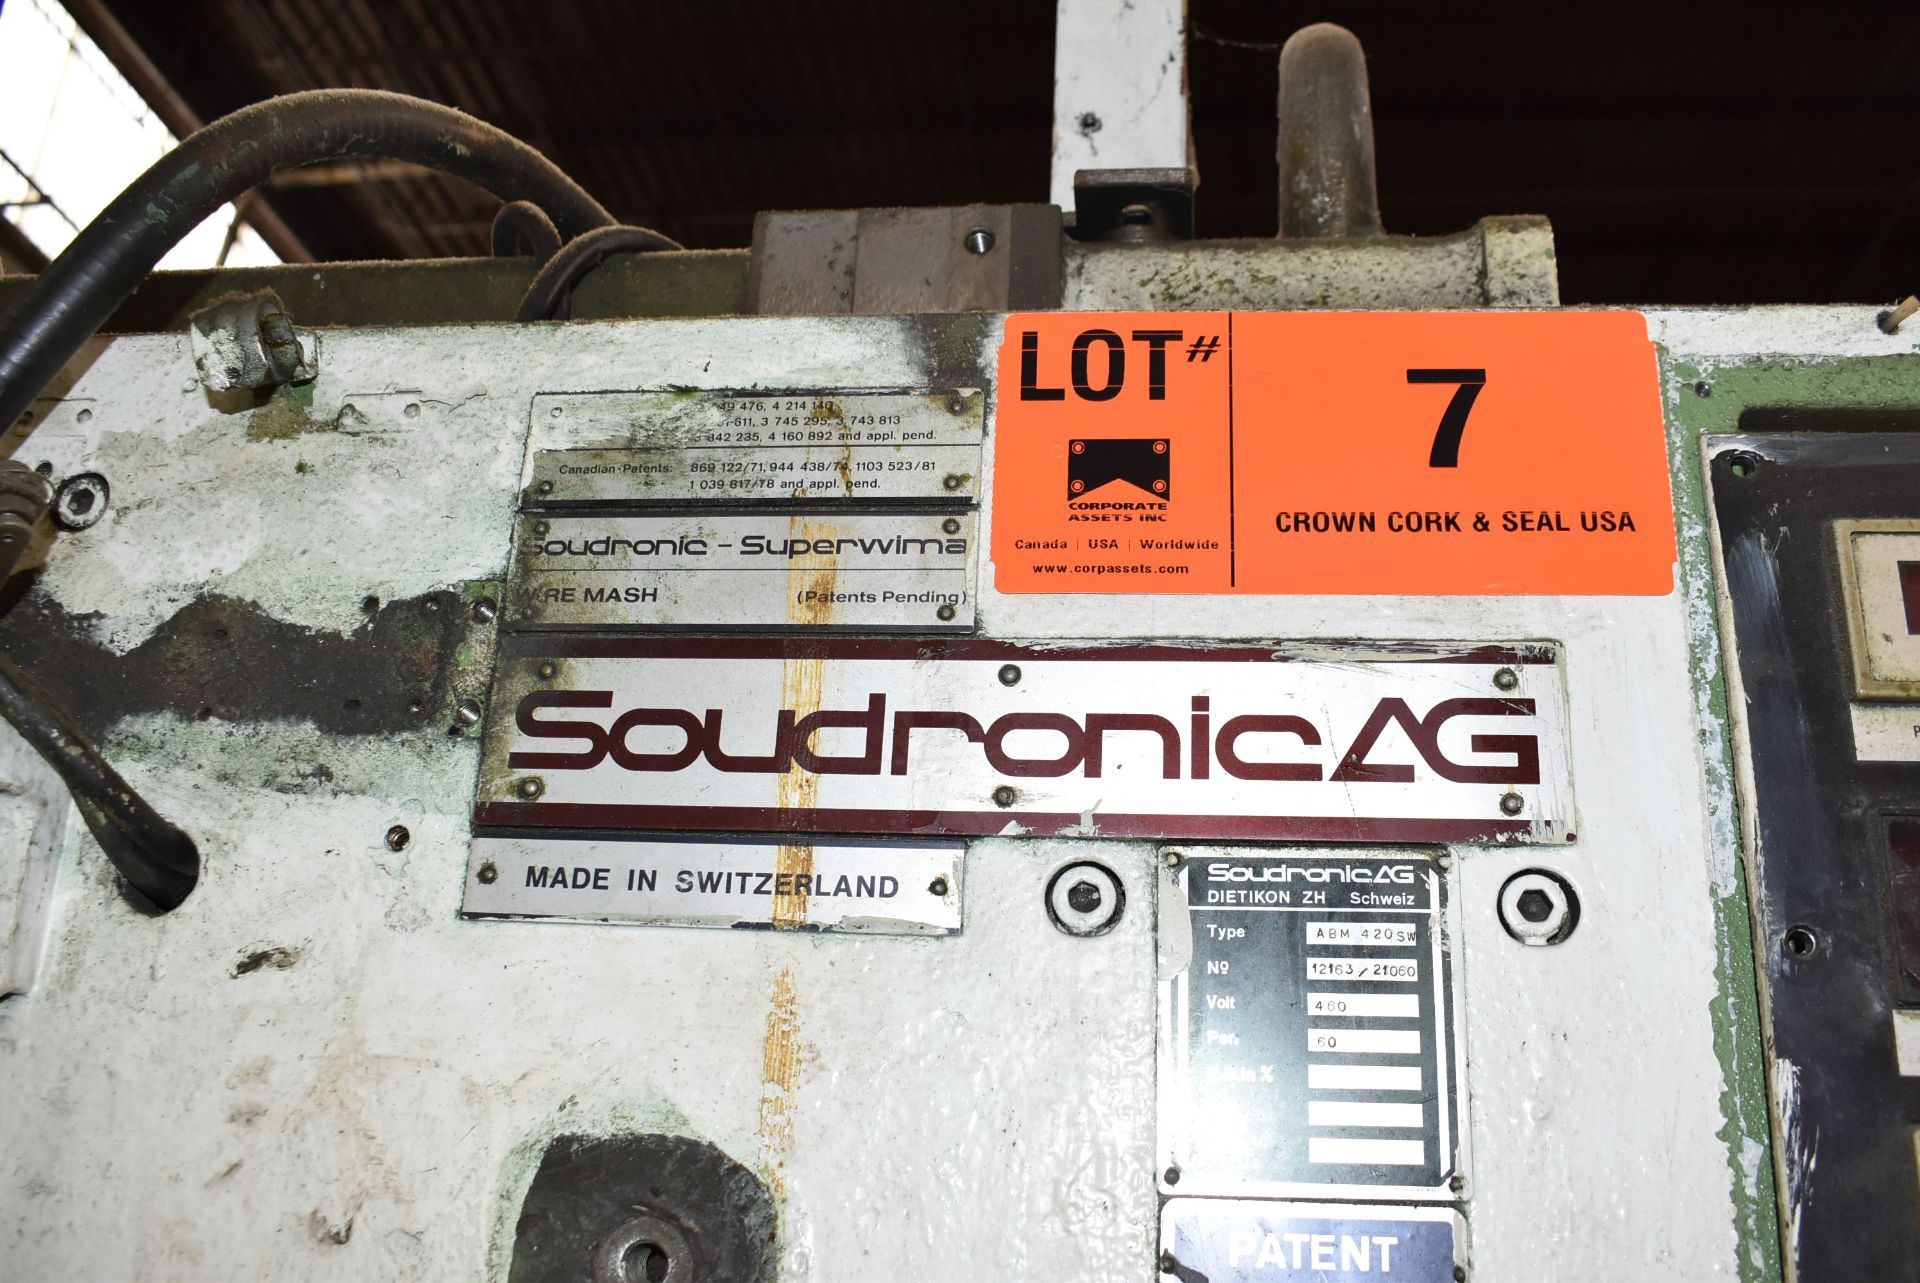 SOUDRONIC ABM 420 SW CAN BODY WELDER, S/N N/A (CI) (PARTS ONLY)(Located at 930 Beaumont Ave, - Image 10 of 13